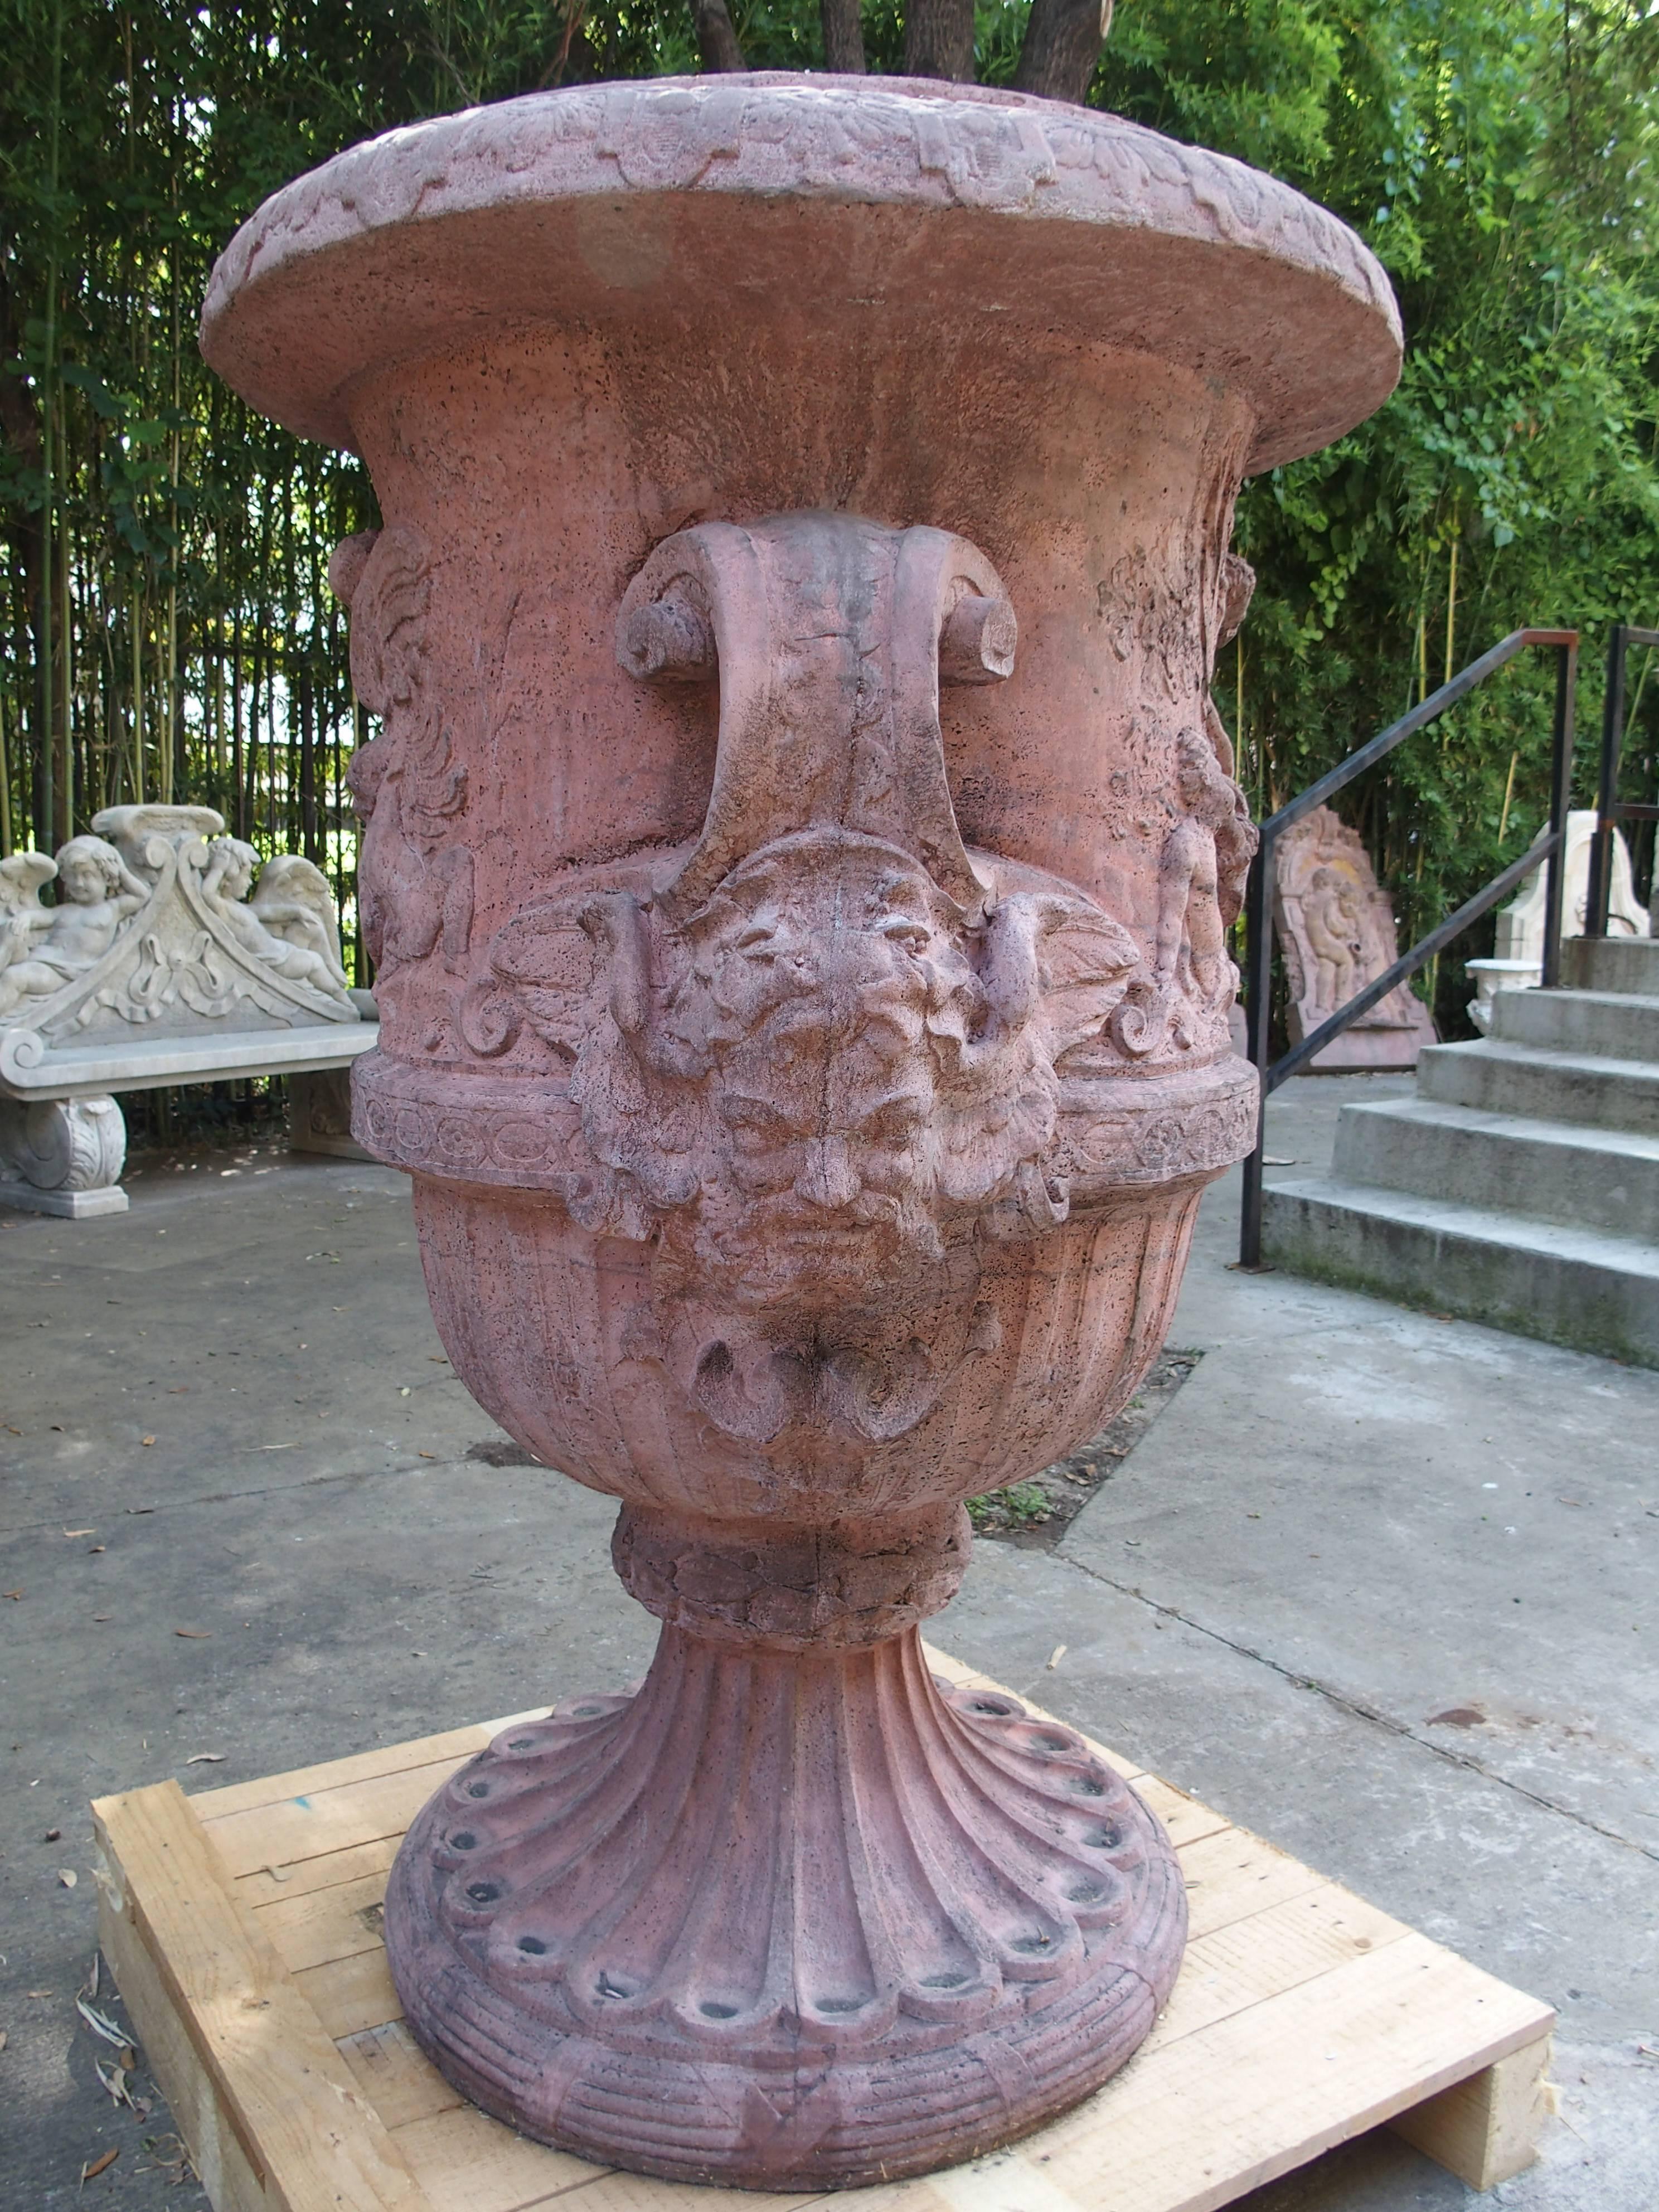 These large, cast stone urns have been made with a mixture of crushed limestone, bluestone, and cement. The terracotta color has been mixed in with the stone, not applied. Their detailed scenes which are in relief, are of mischievous putti at play